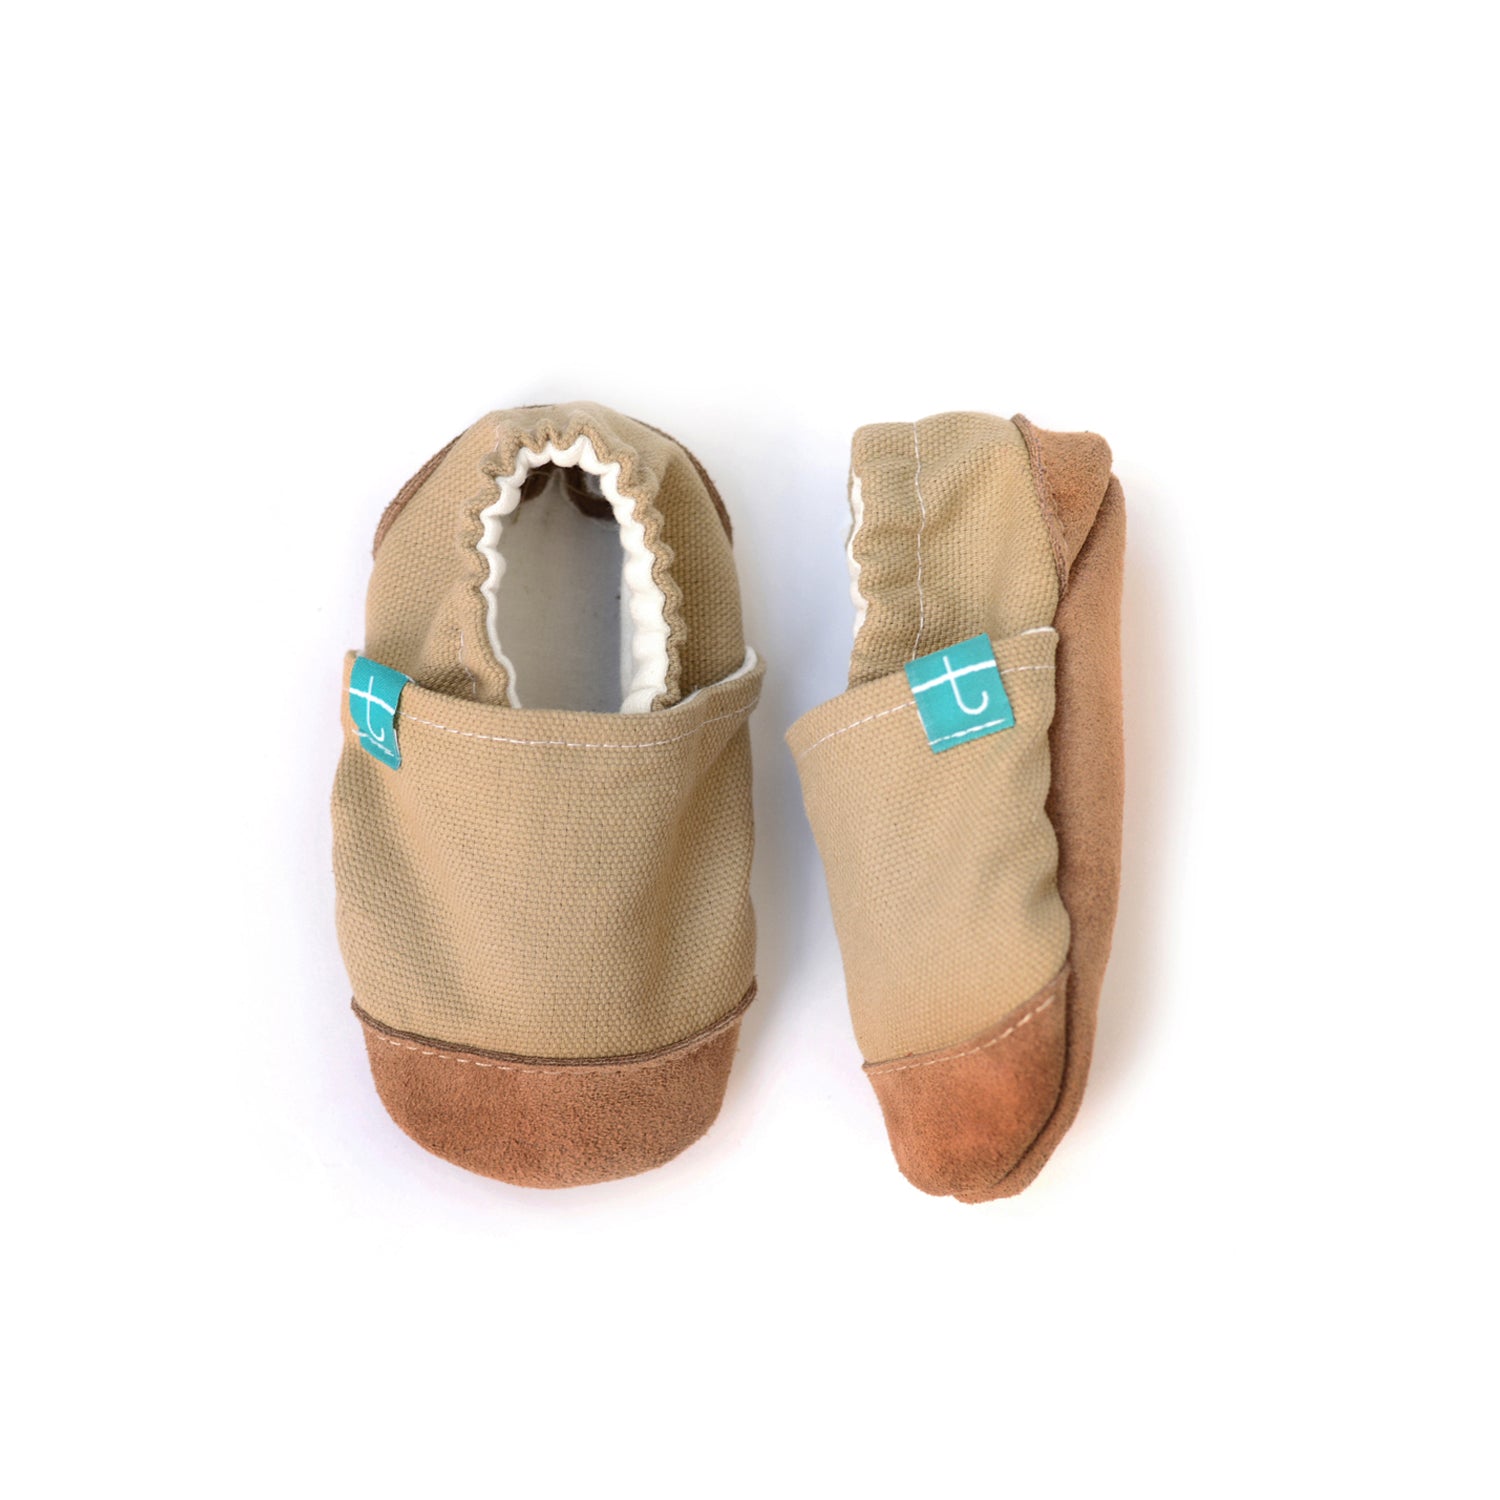 Glee Iced Coffee Child Slippers